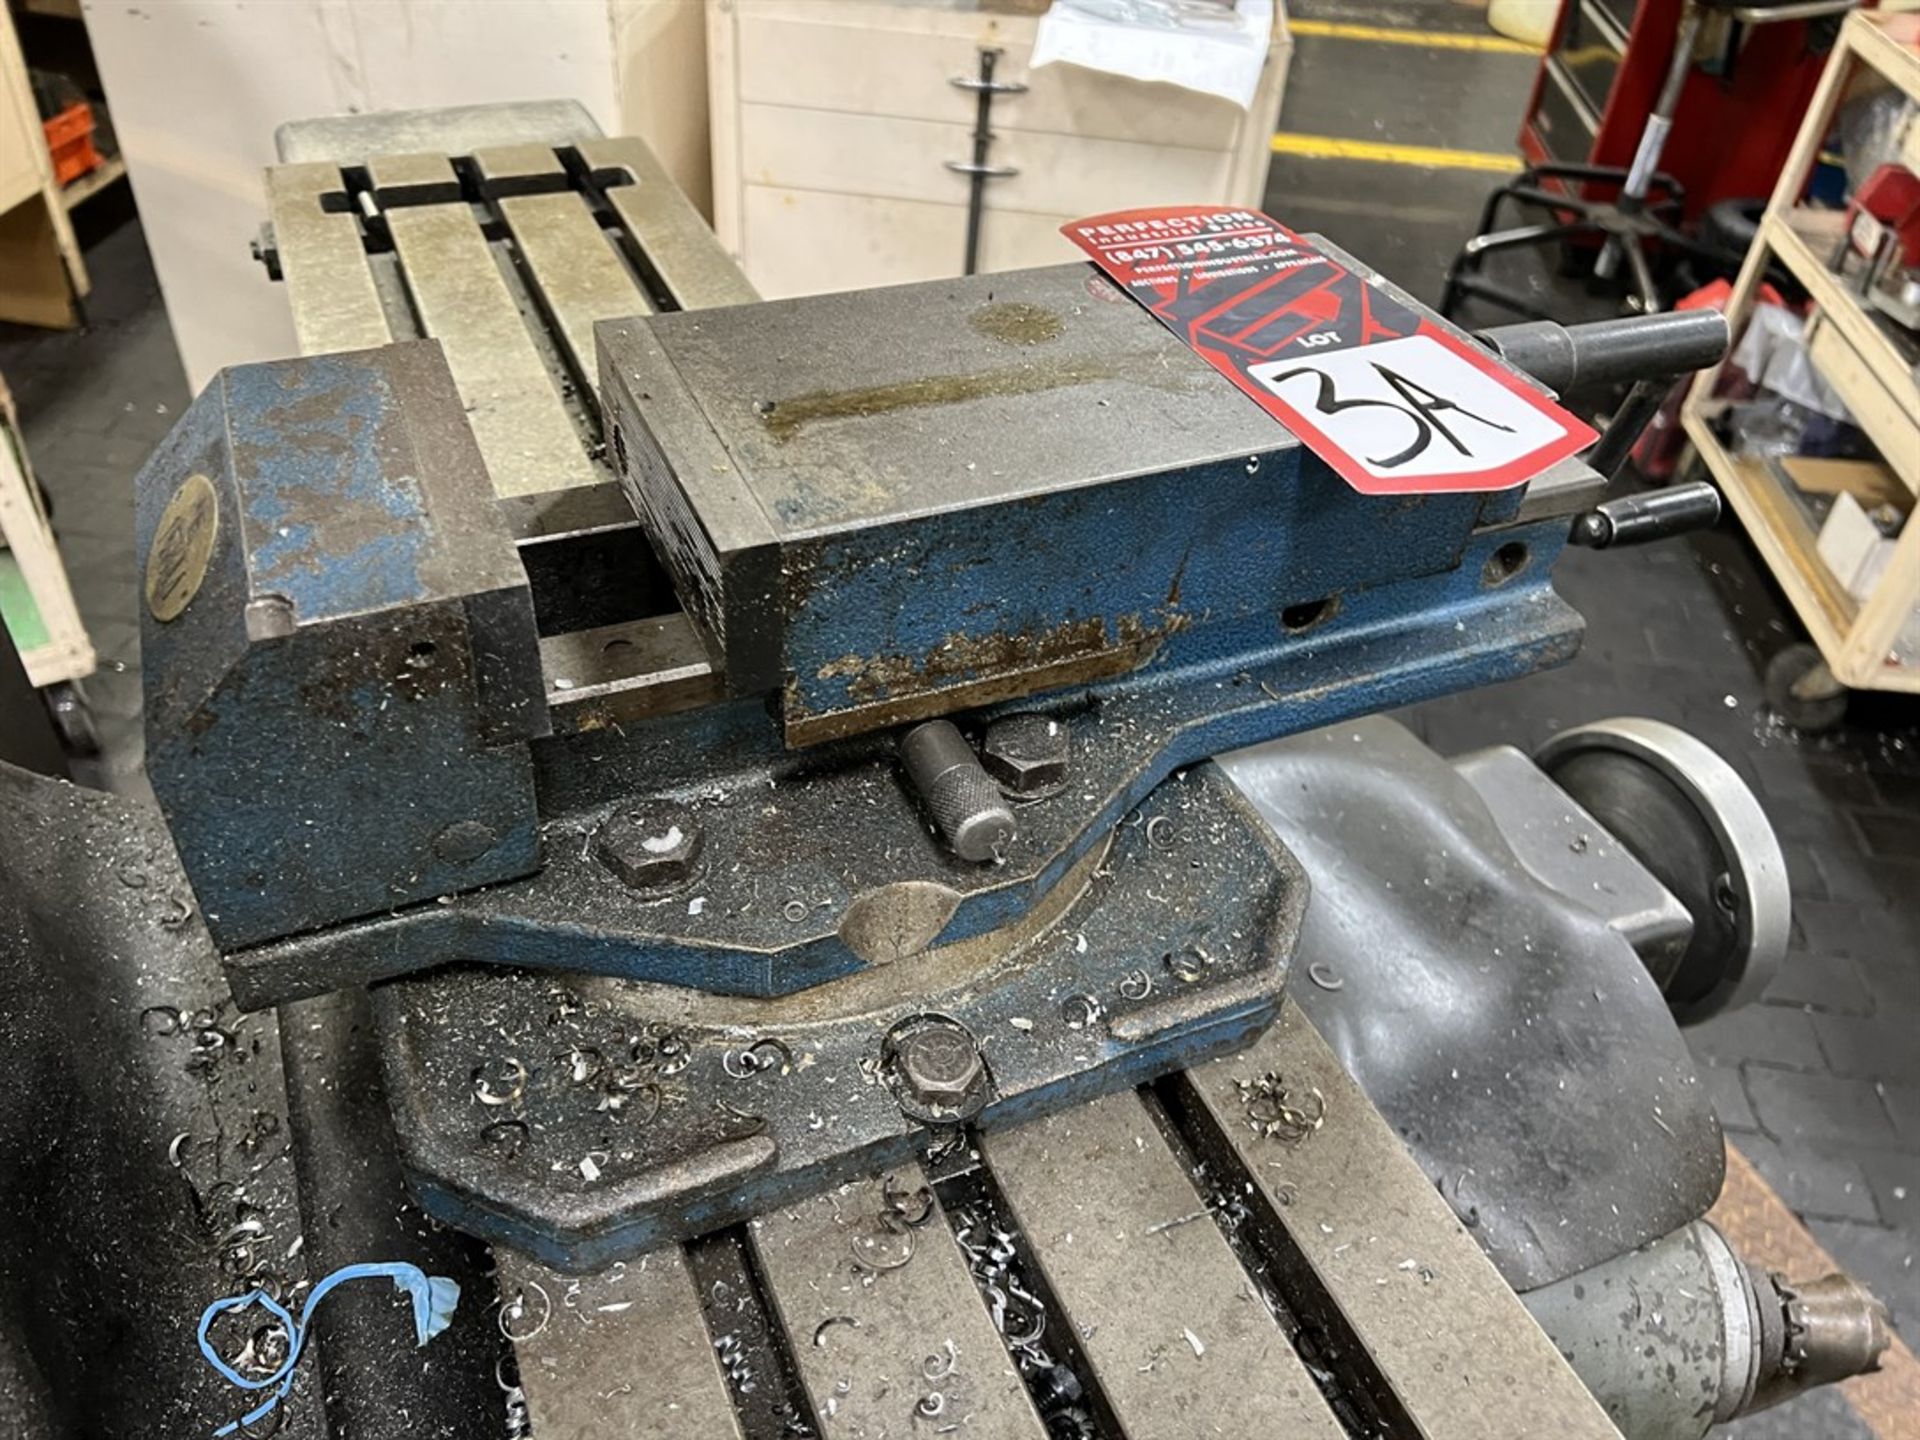 HILMA 5" Machine Vise (A rigging cost of $25.00 will be added to the winning bidders invoice)